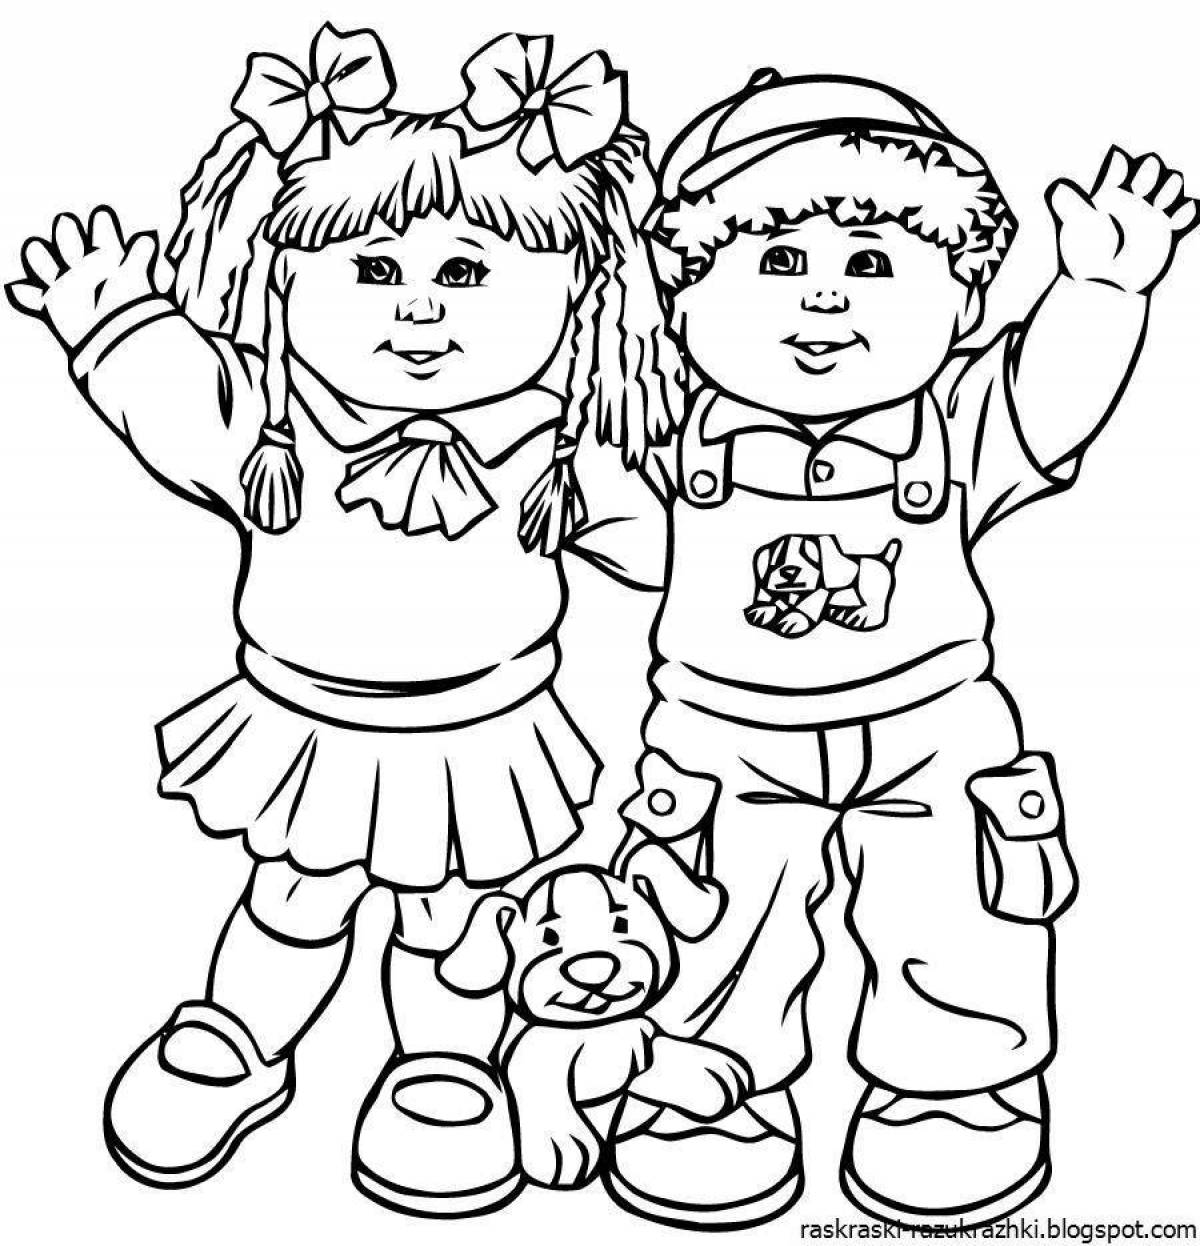 Great friendship coloring book